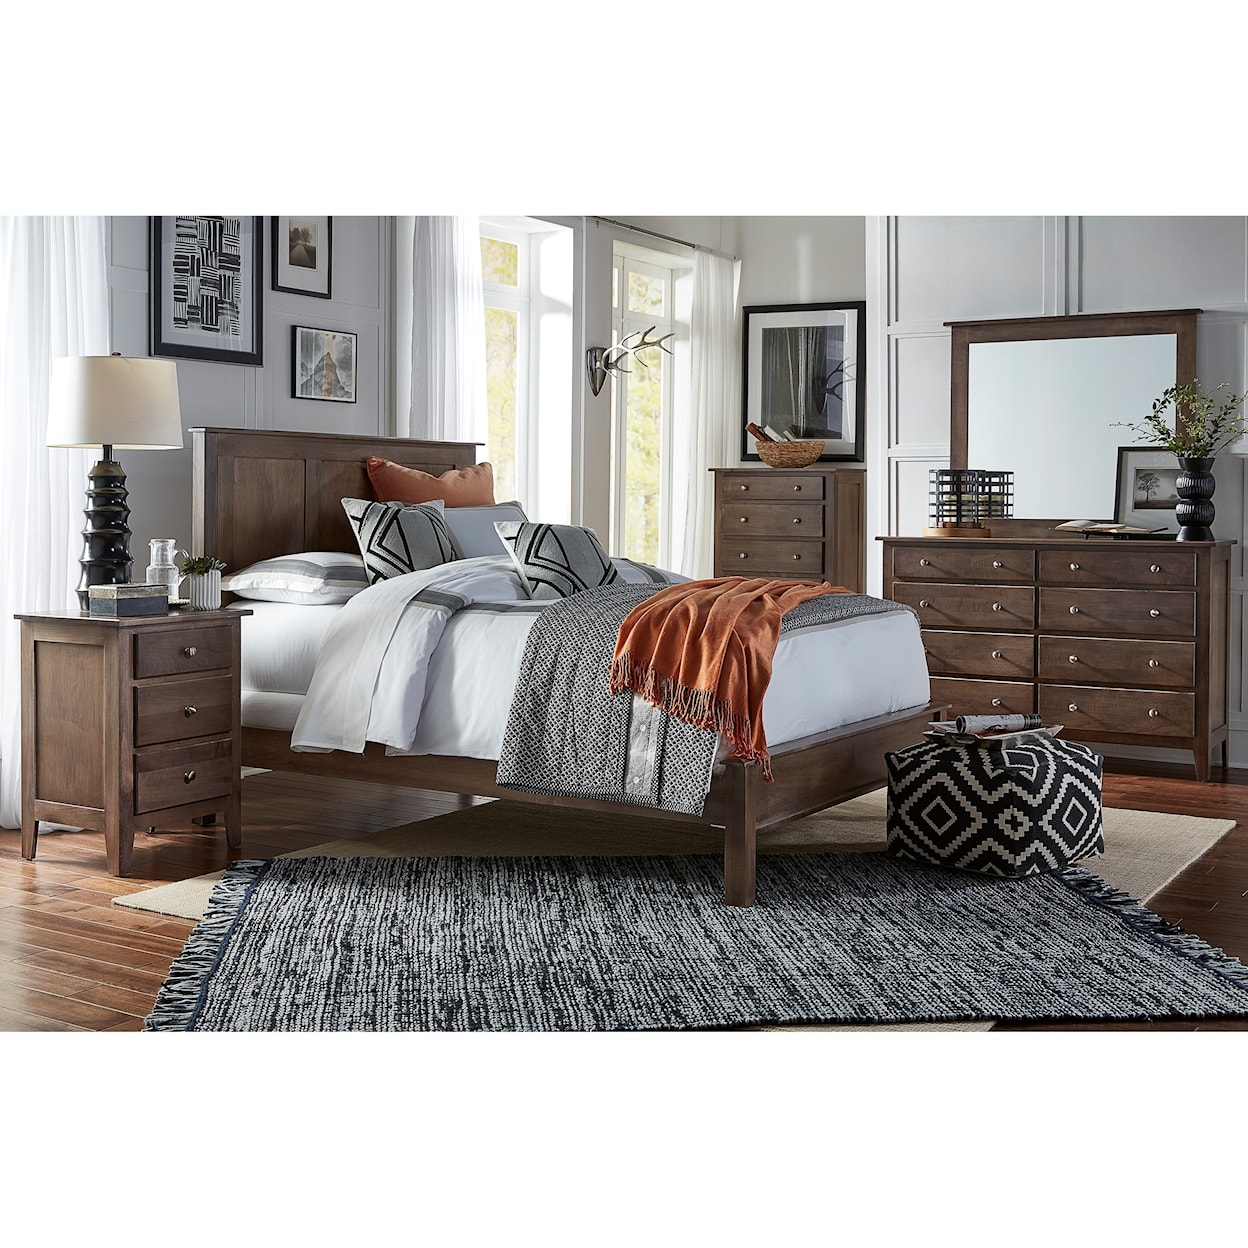 Daniel's Amish Mapleton King Bed with Low Footboard